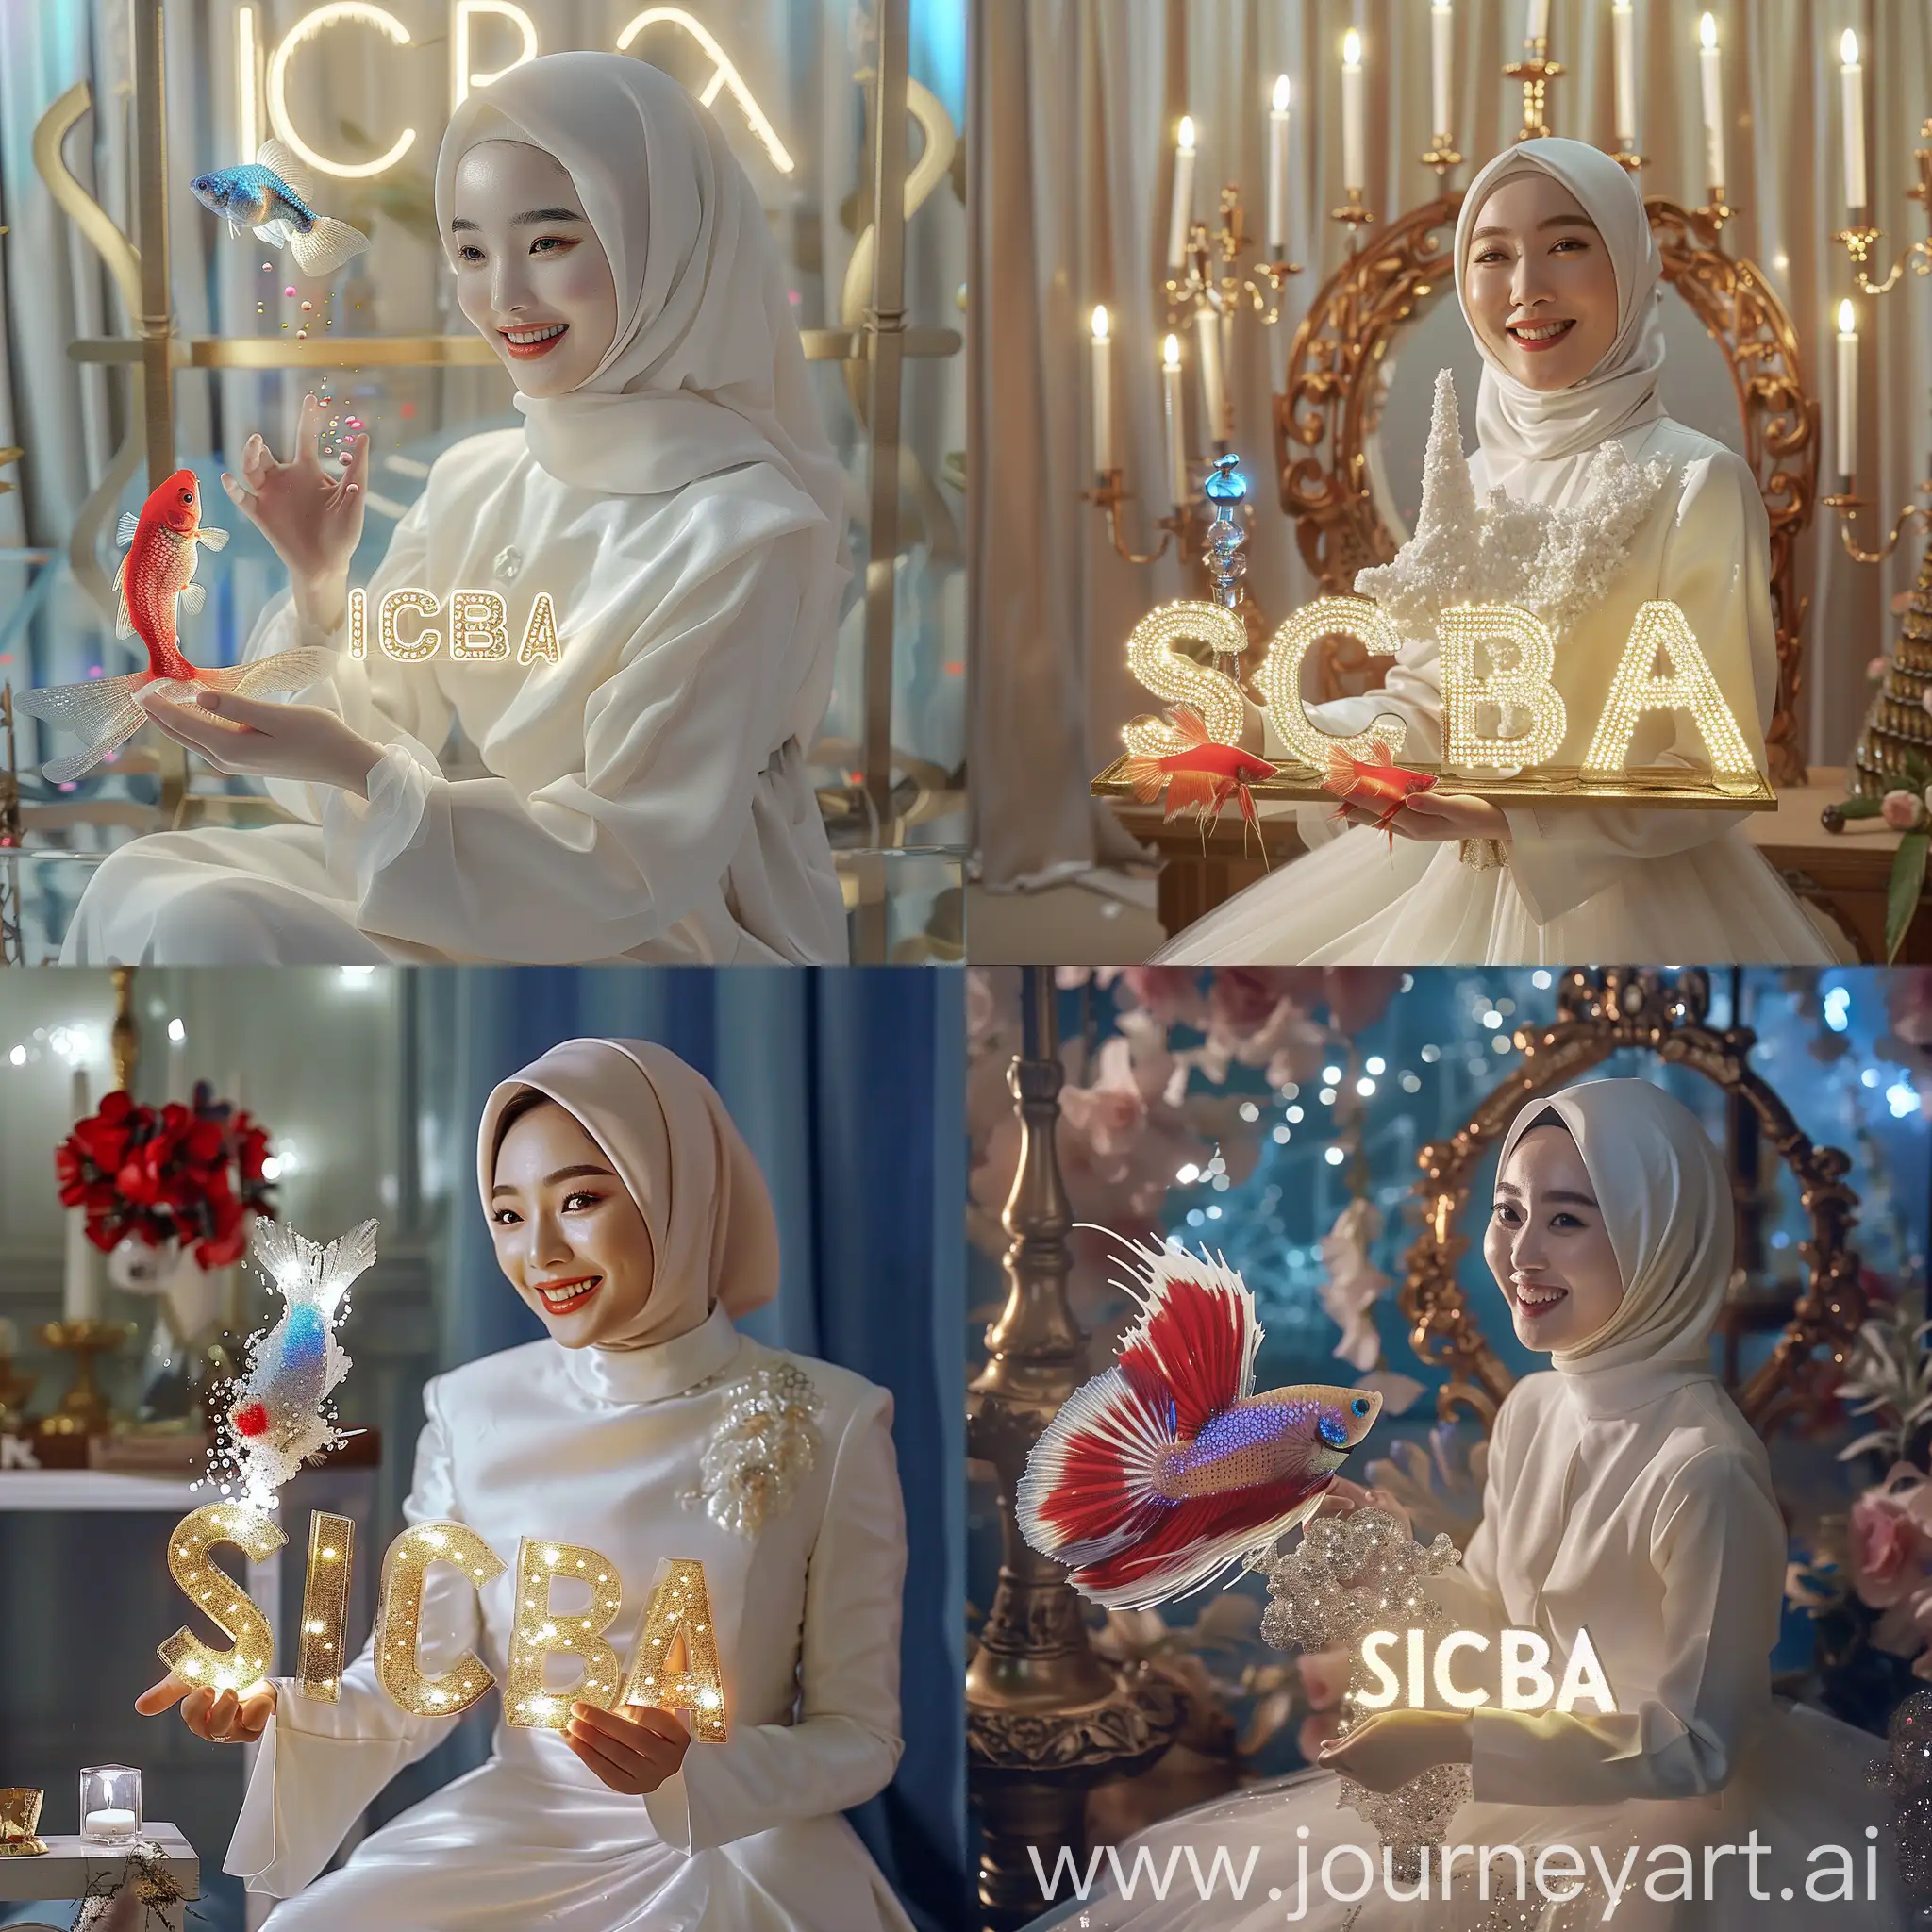 Stunningly-Realistic-Crystal-SICBA-Text-Glow-with-Gold-Chrome-Water-and-Beautiful-Korean-Hijab-Woman-Holding-Beta-Fish